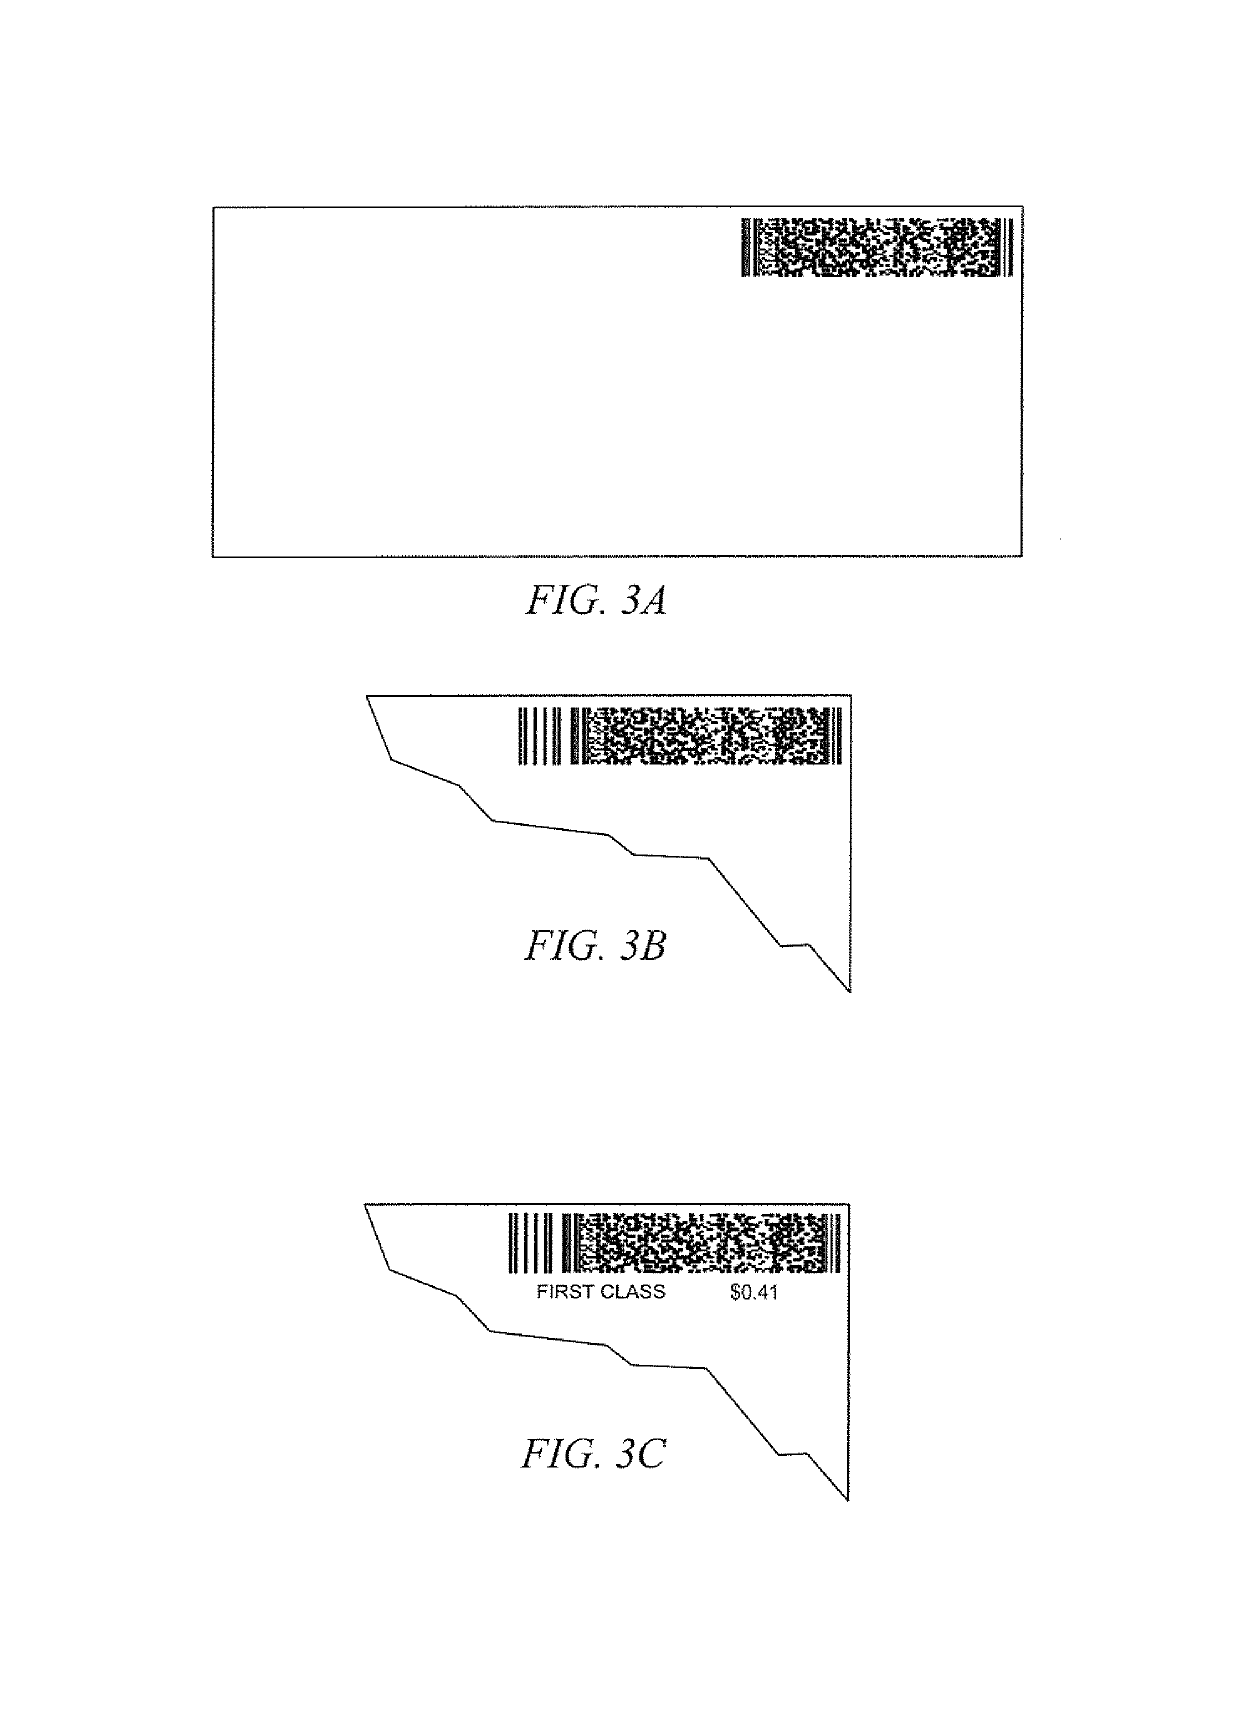 Systems and methods for distributed activation of postage